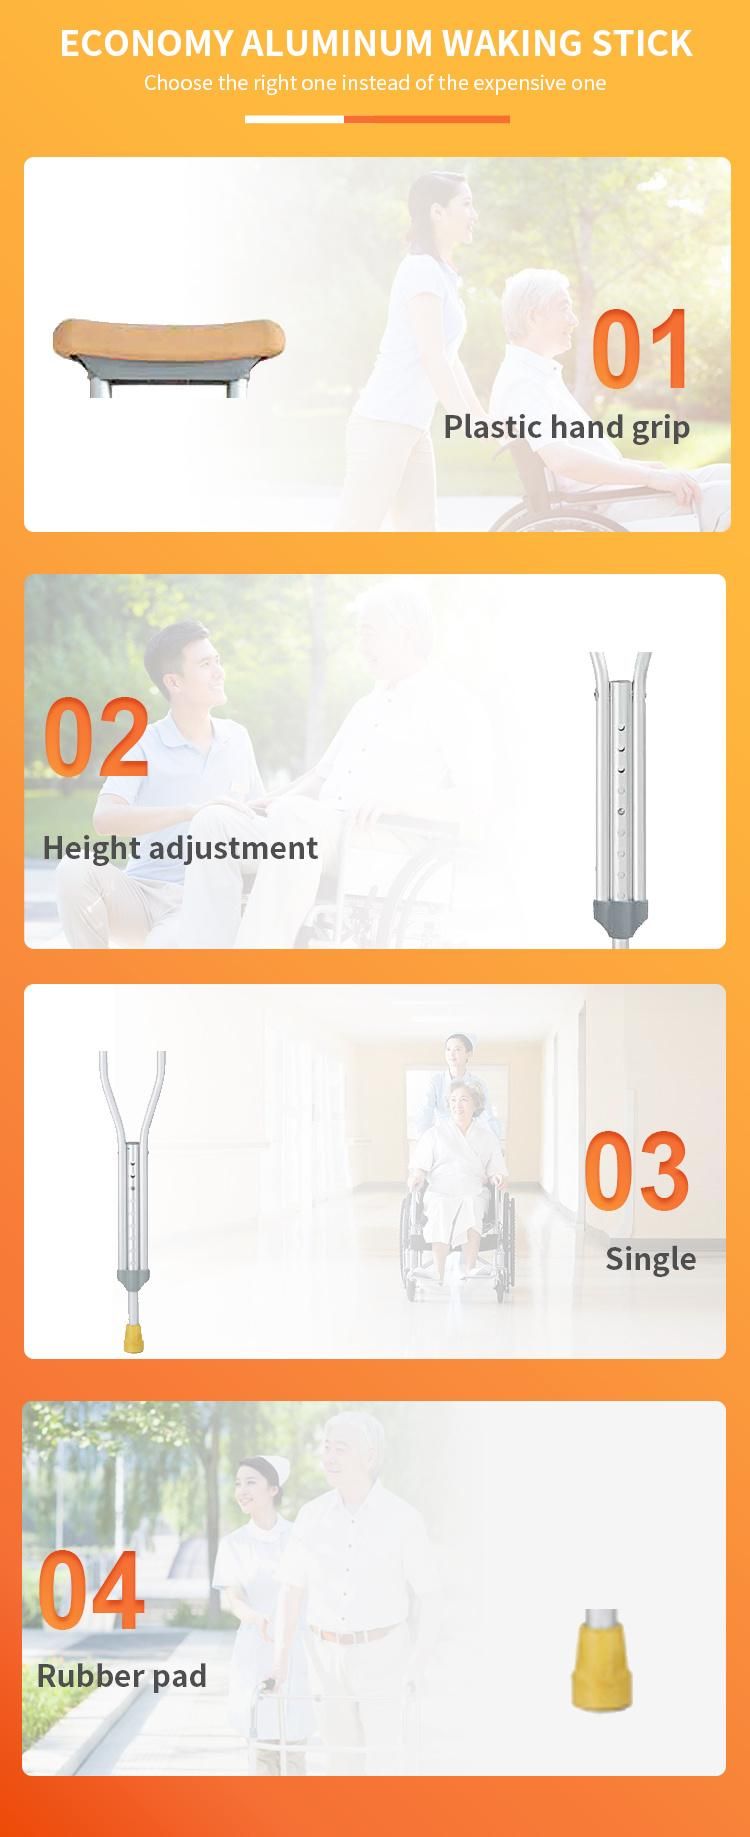 Aluminum Adjustable Hieght Easy Carry portable Anti-Slip Foot Glue Under Arm Walking Stick Yellow Color Weight Capacity 100kgs Cane Medical Equipment